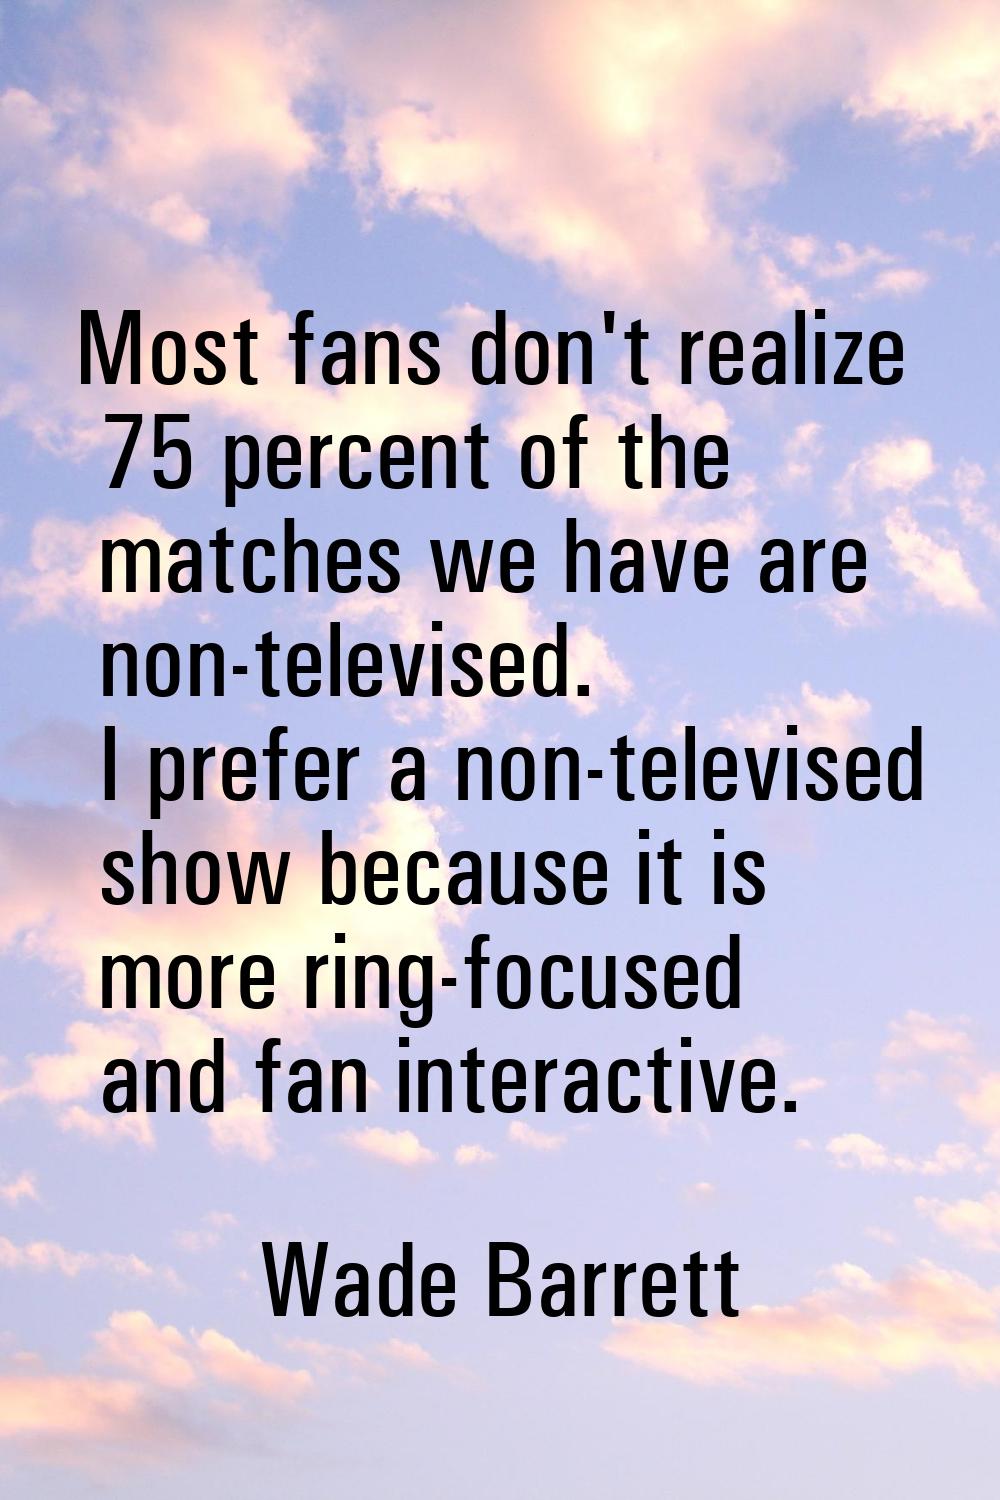 Most fans don't realize 75 percent of the matches we have are non-televised. I prefer a non-televis